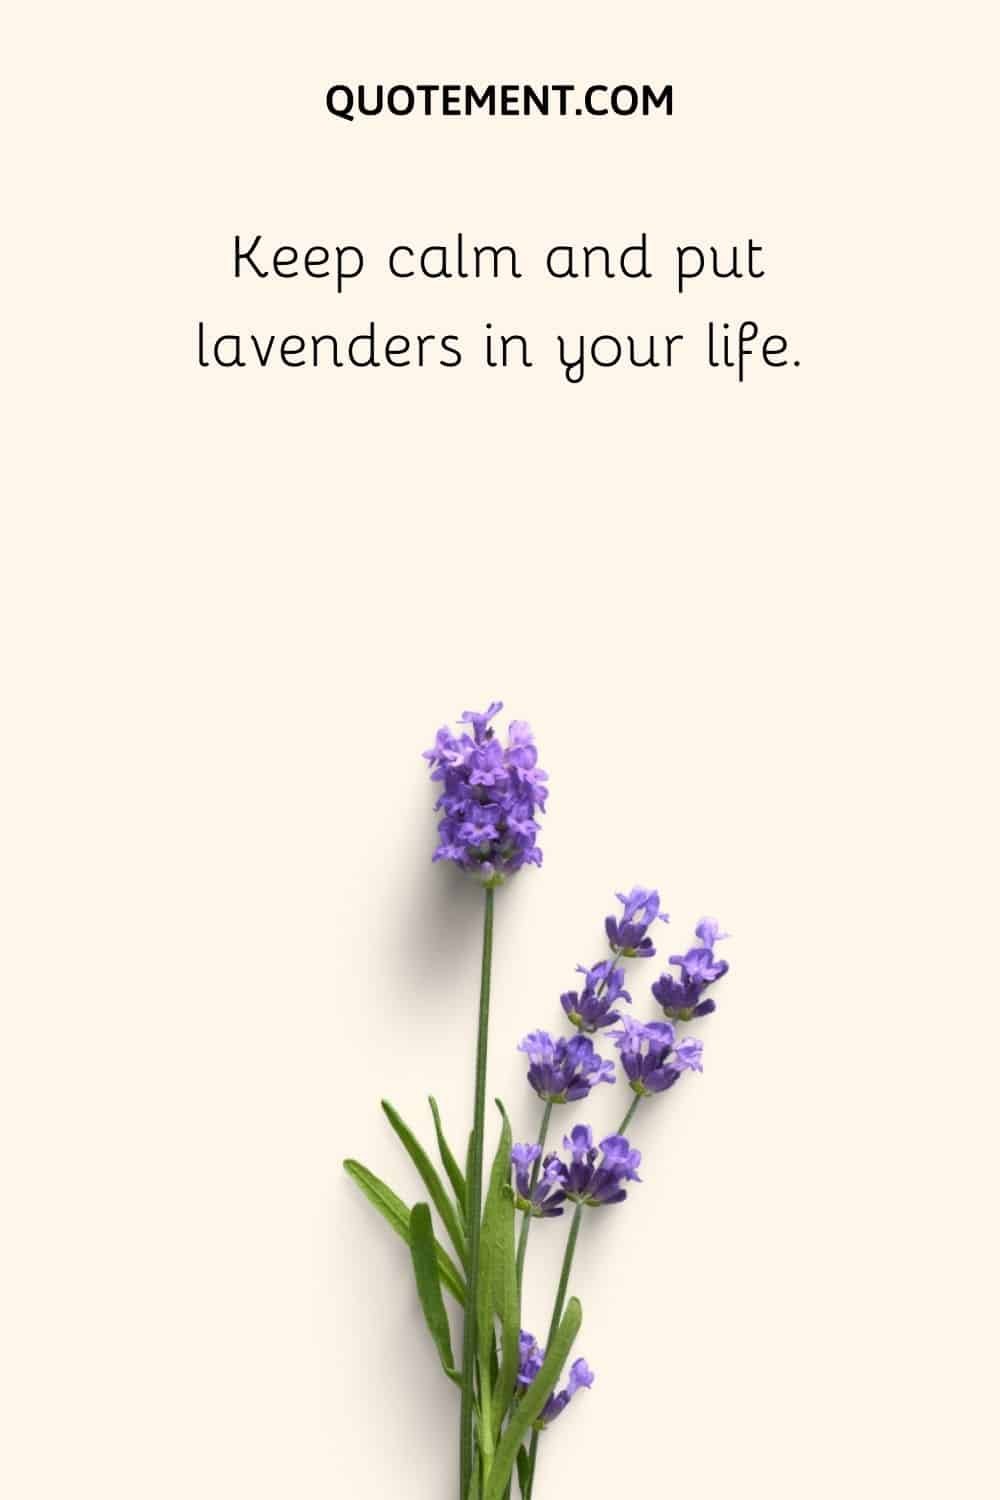 Keep calm and put lavenders in your life